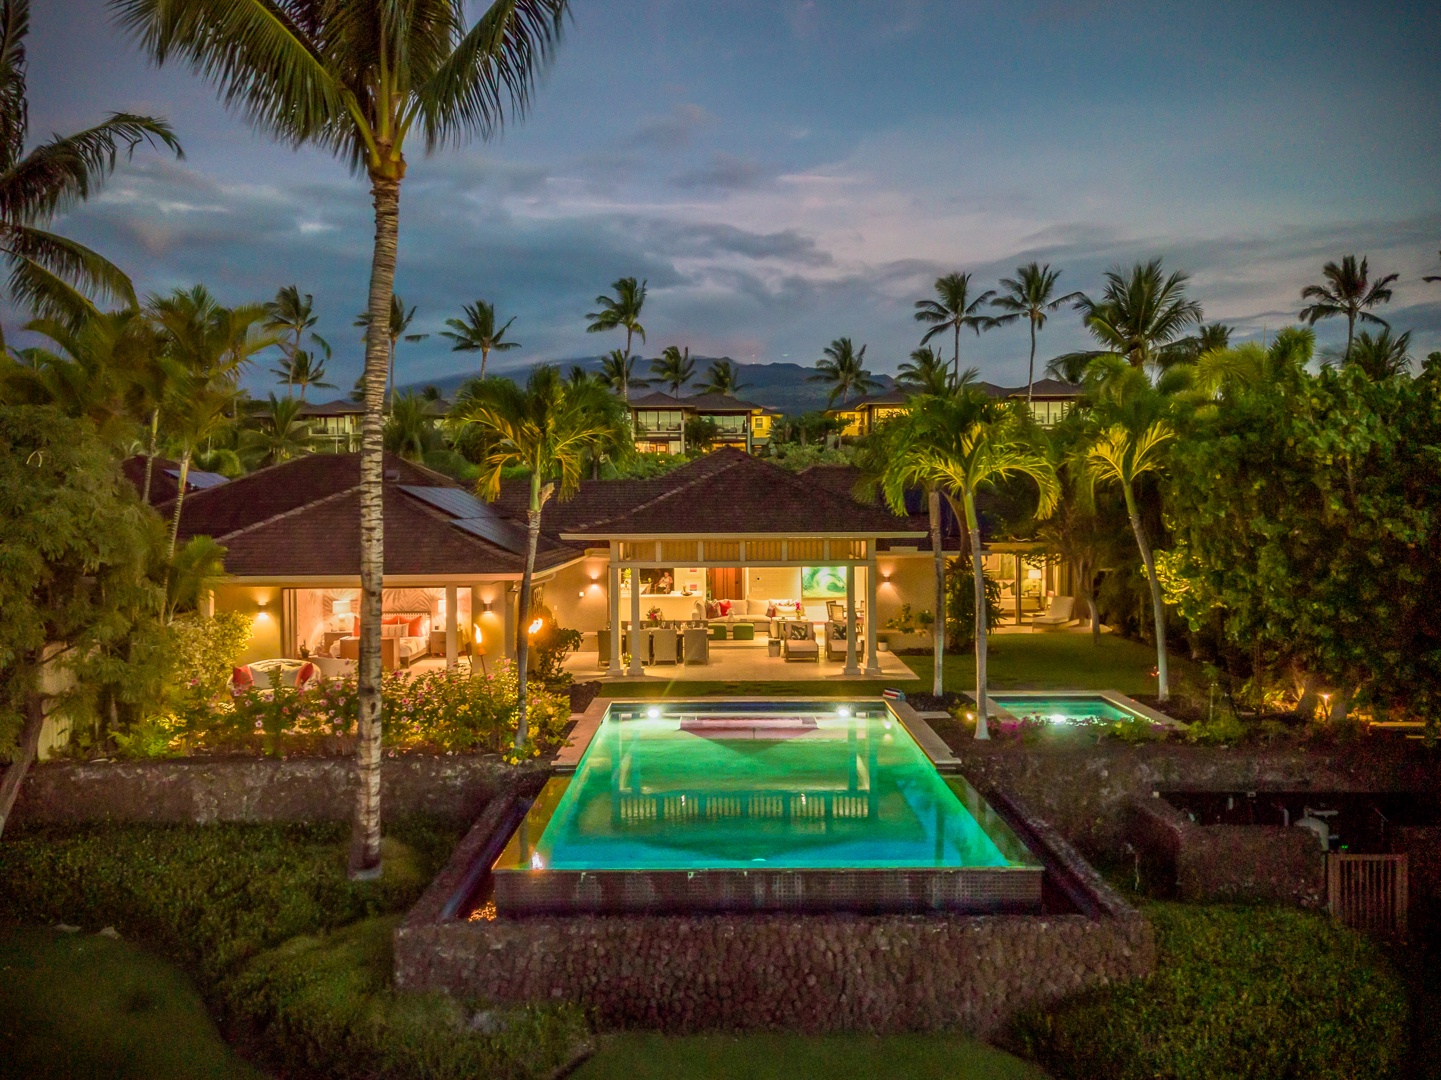 Kailua Kona Vacation Rentals, 4BD Hainoa Estate (122) at Four Seasons Resort at Hualalai - One of a kind property for your best vacation yet!